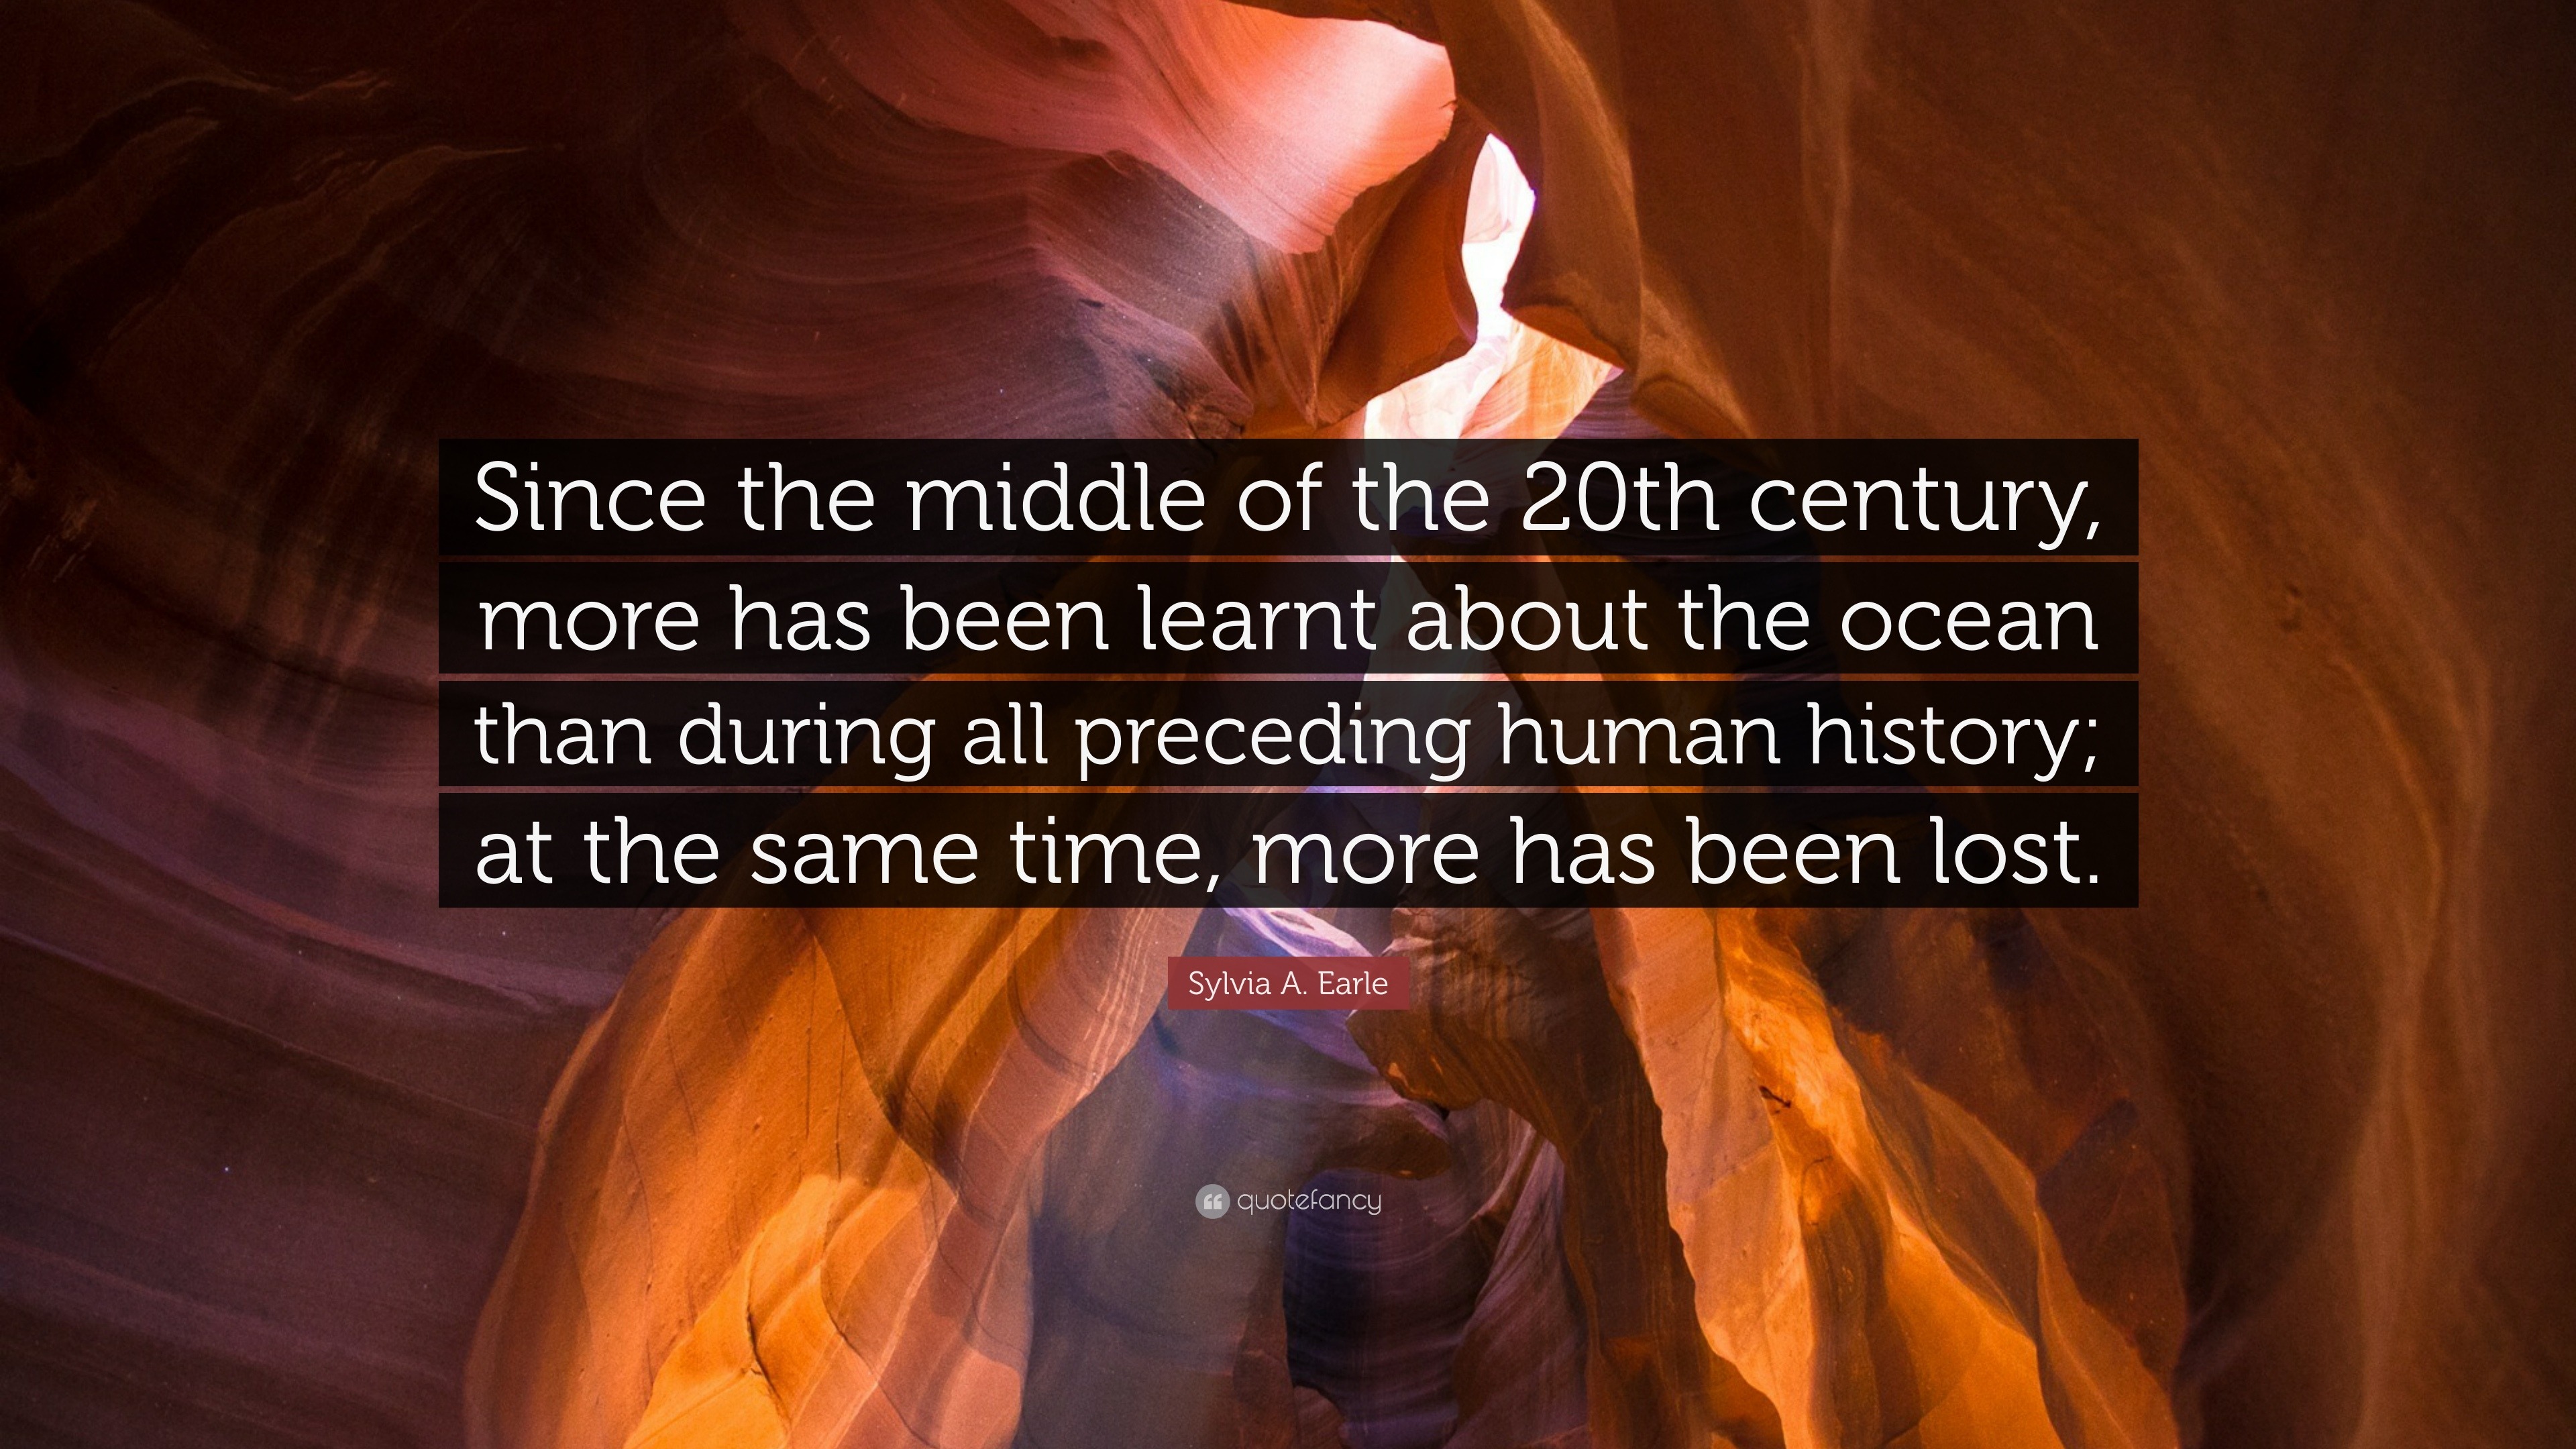 Sylvia A. Earle Quote: “Since the middle of the 20th century, more has